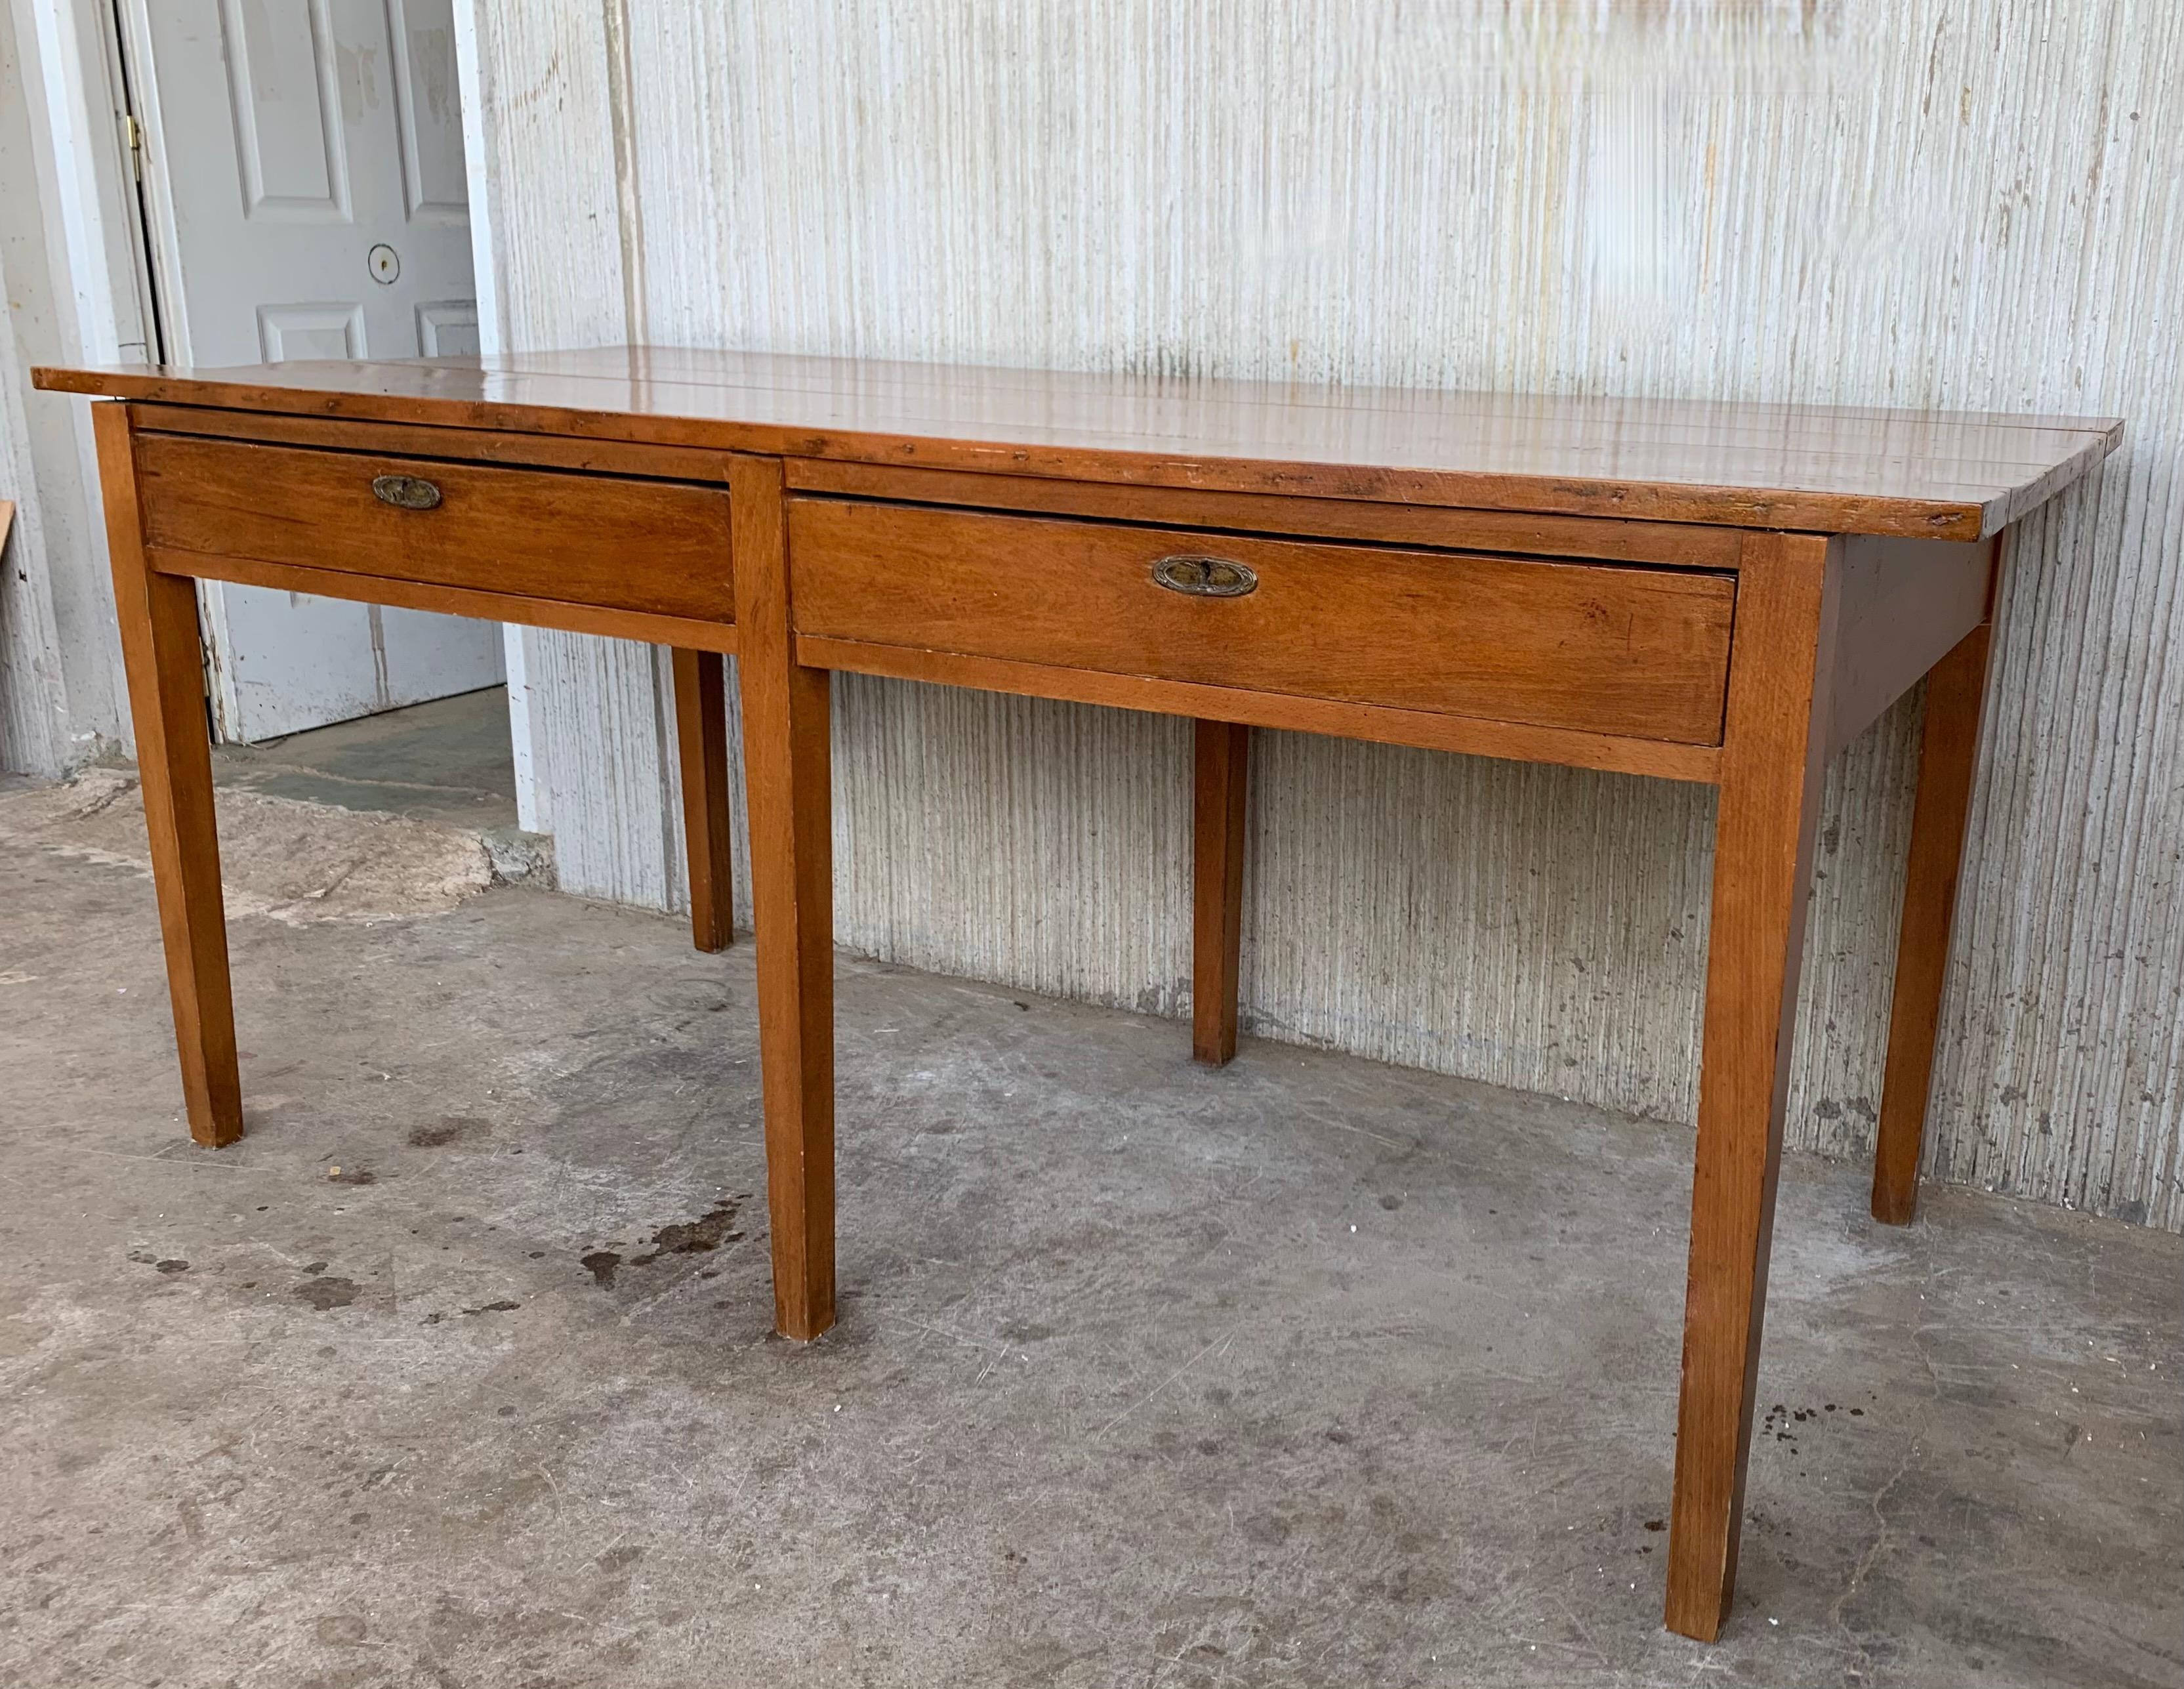 Spanish Colonial Early 20th Spanish Mobila Country Farm Desk Table or Butcher Block For Sale